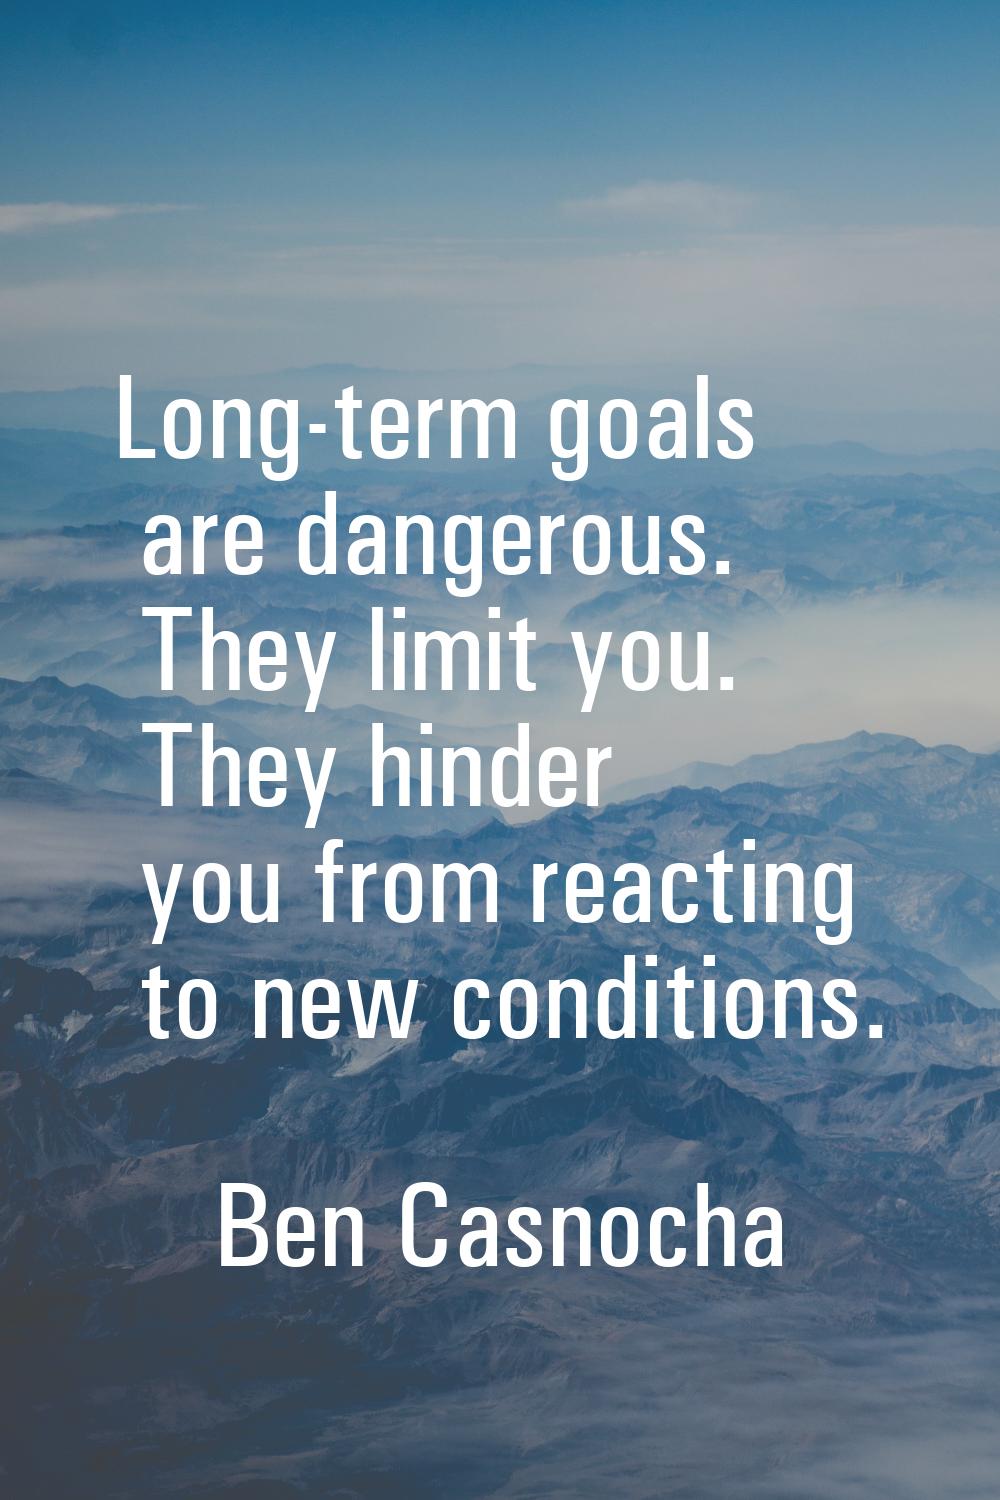 Long-term goals are dangerous. They limit you. They hinder you from reacting to new conditions.